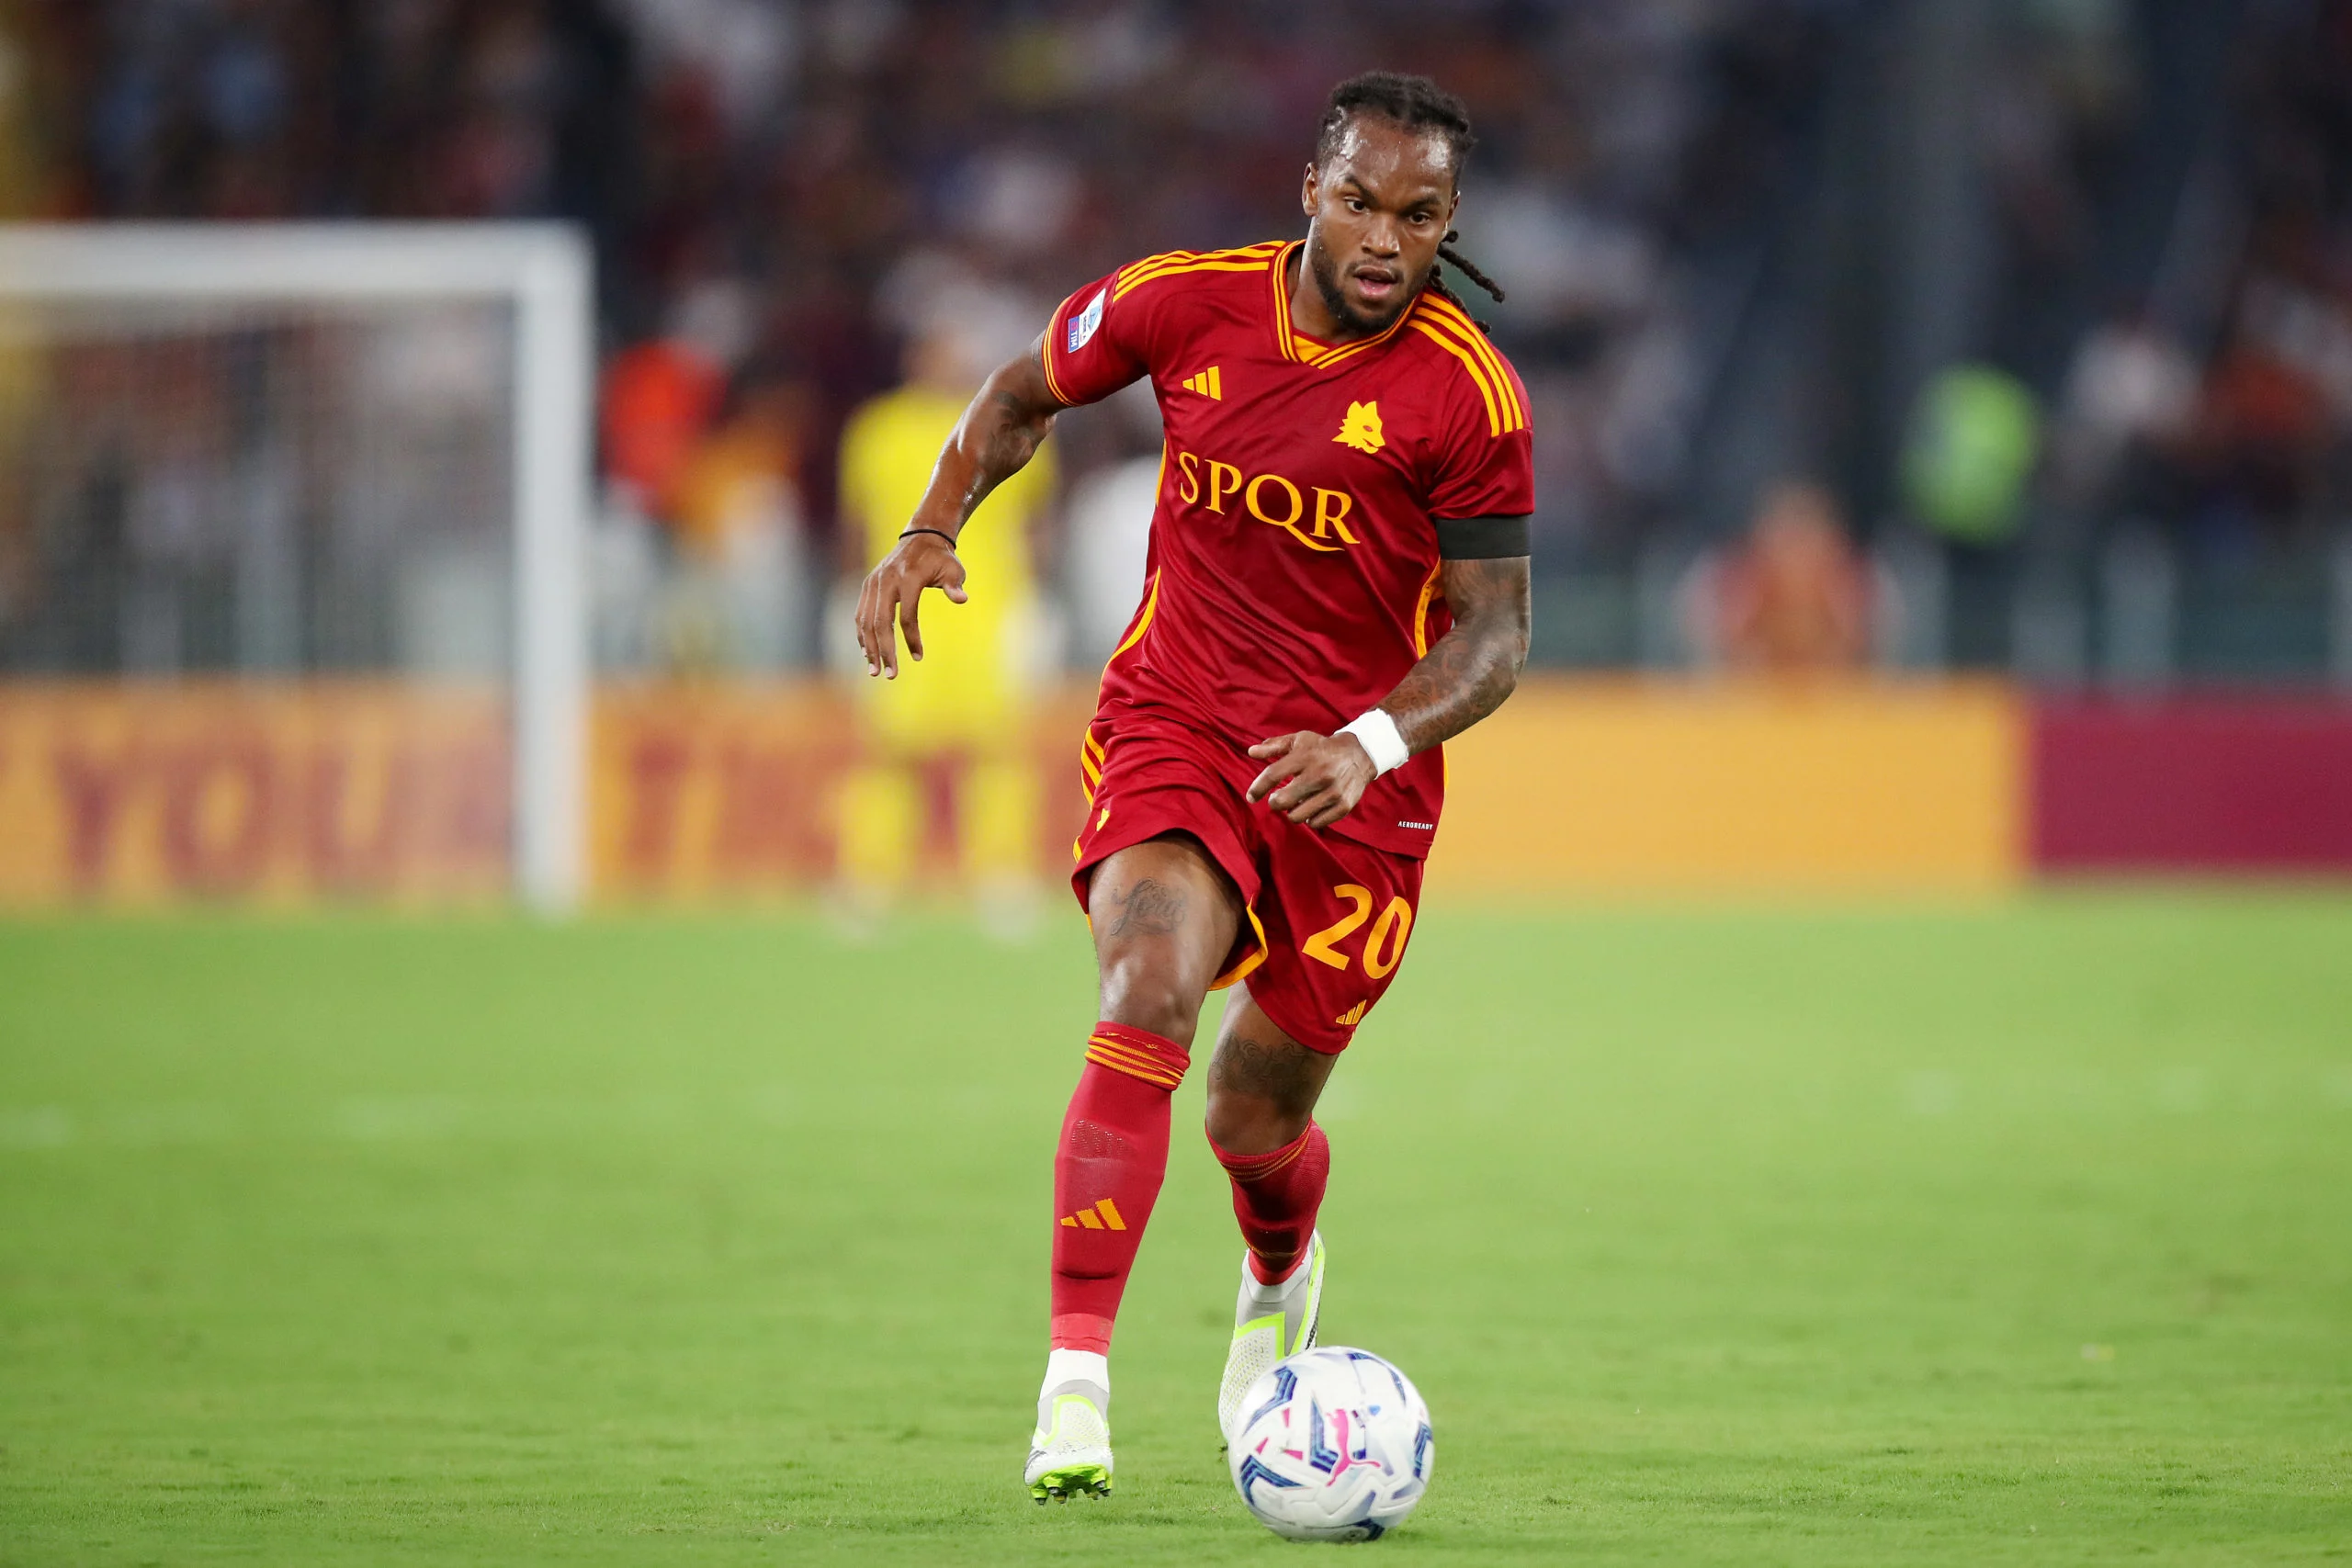 As has been apparent for months given his very limited role, Roma won’t keep Renato Sanches permanently following an injury-riddled loan spell from PSG.